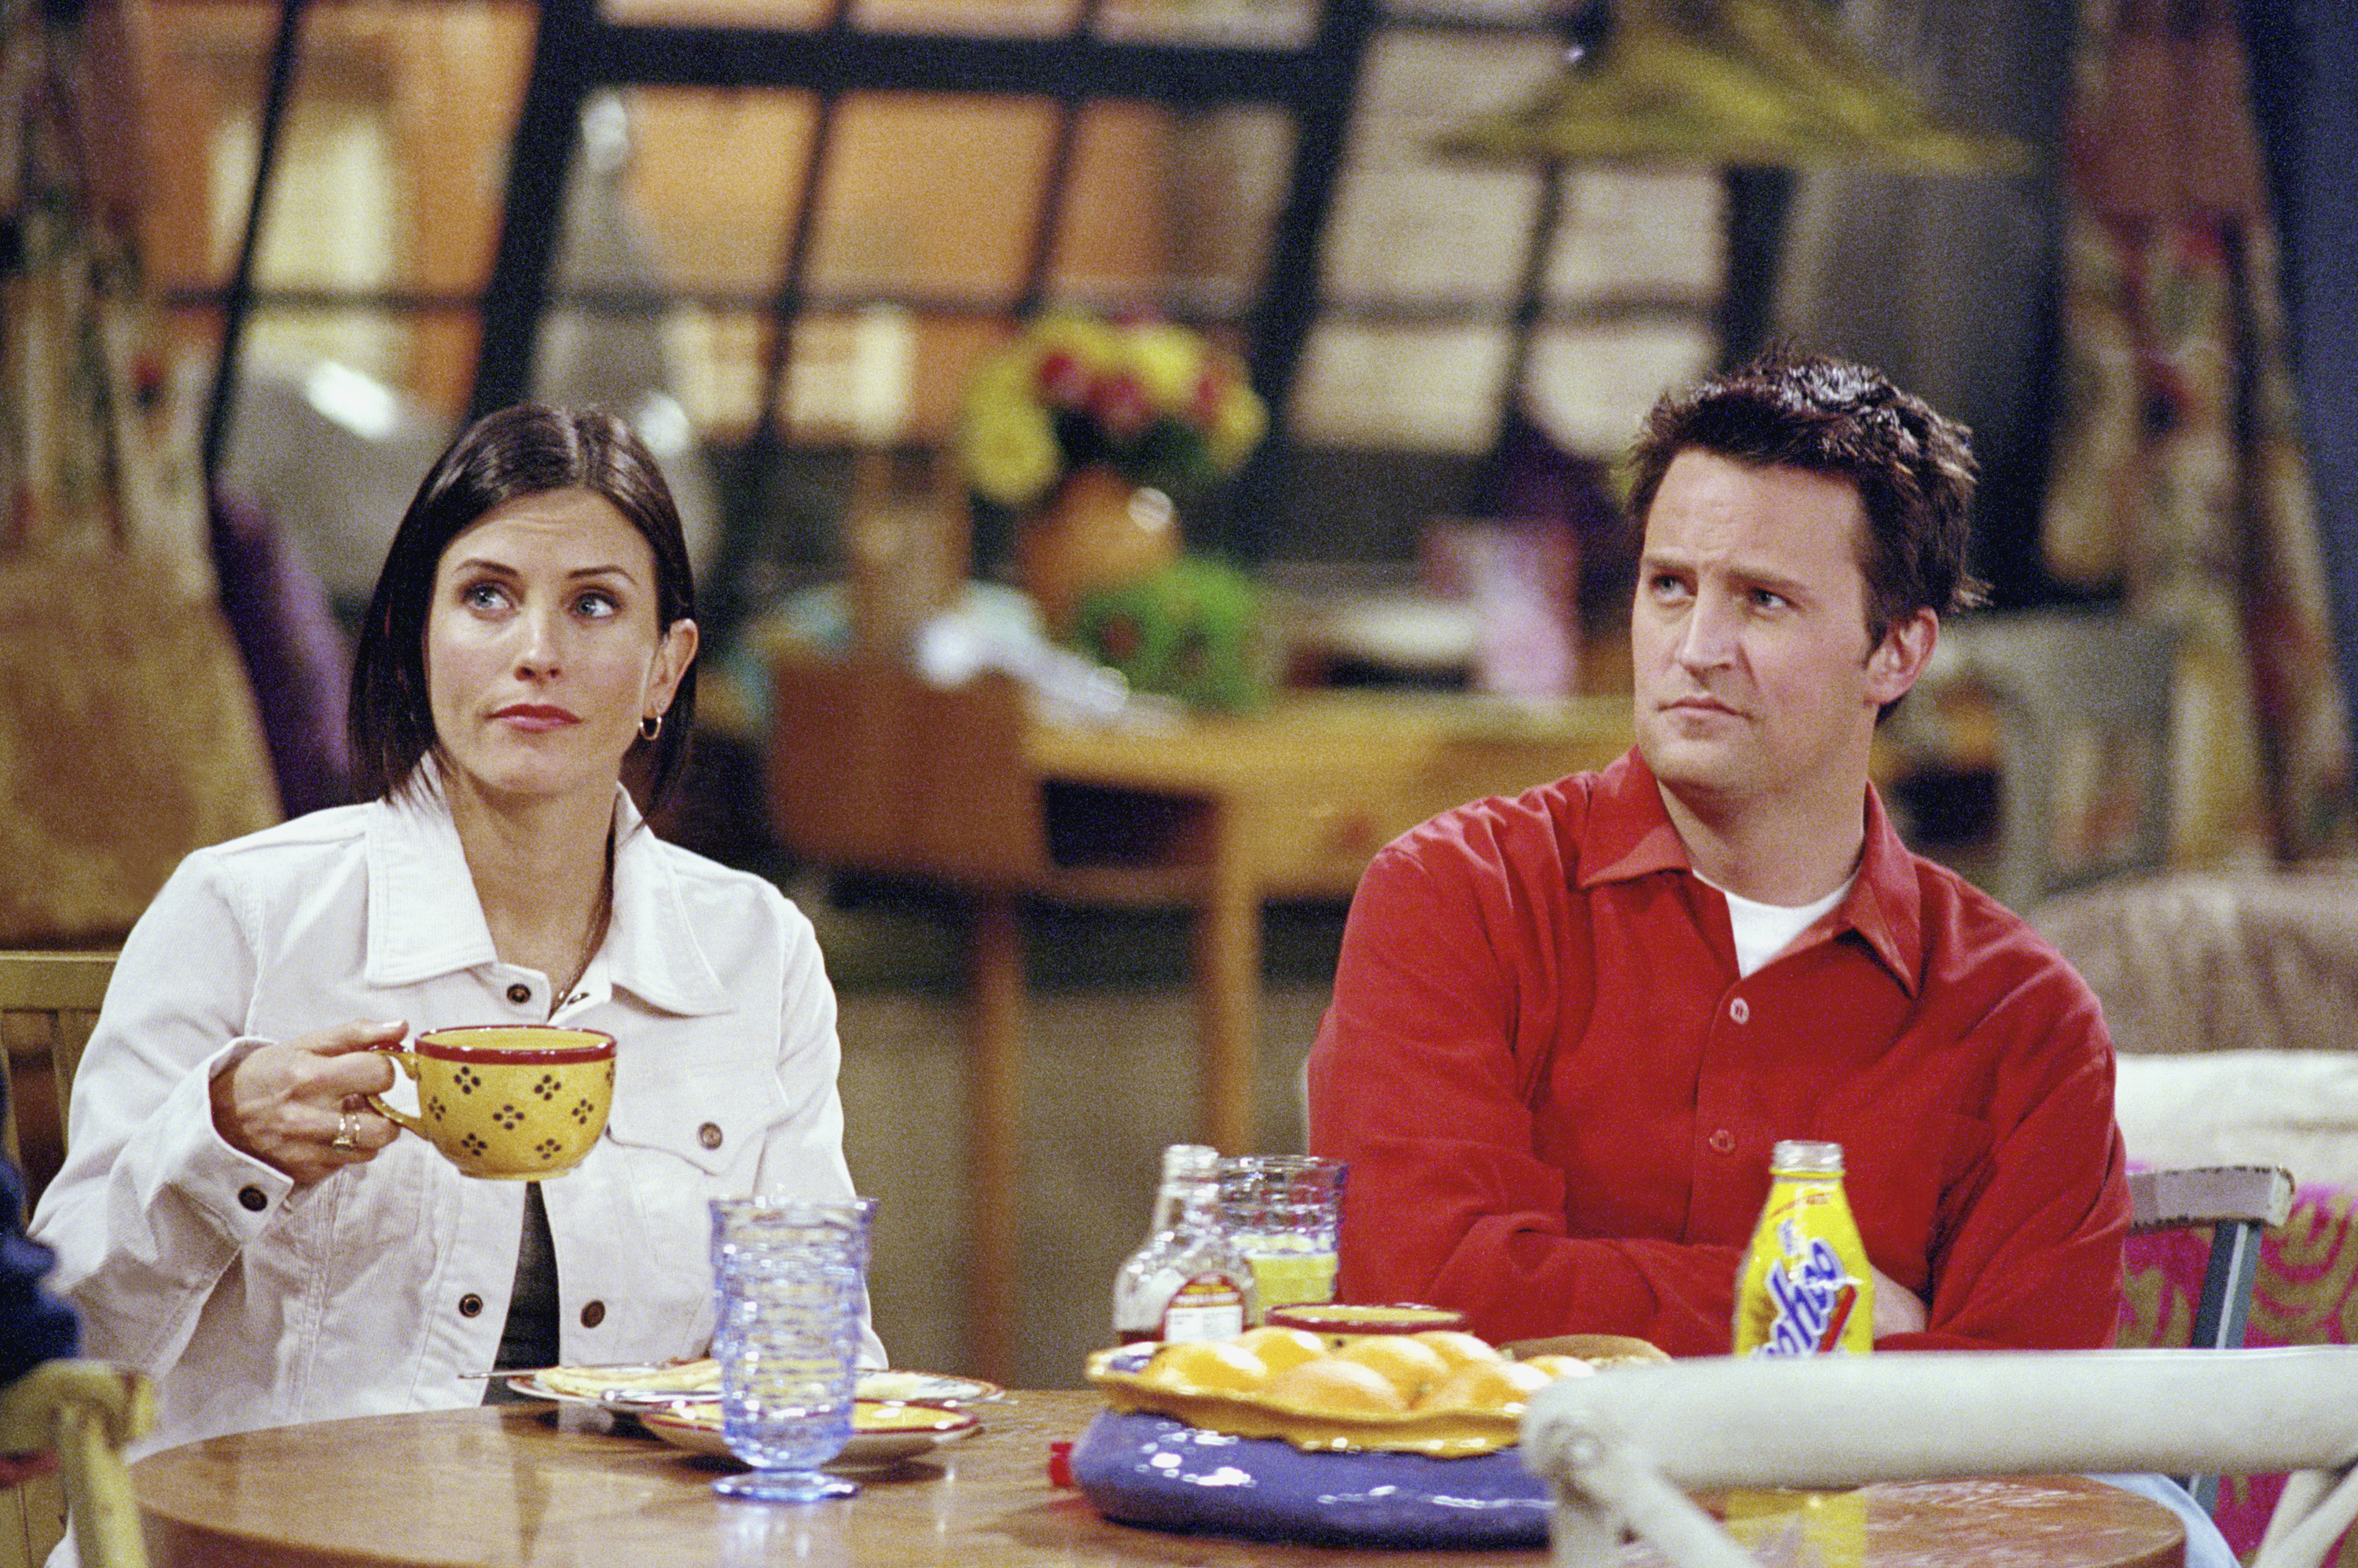 Courteney Cox as Monica Geller-Bing and Matthew Perry as Chandler Bing on the set of "Friends" on February 22, 2001. | Source: Getty Images